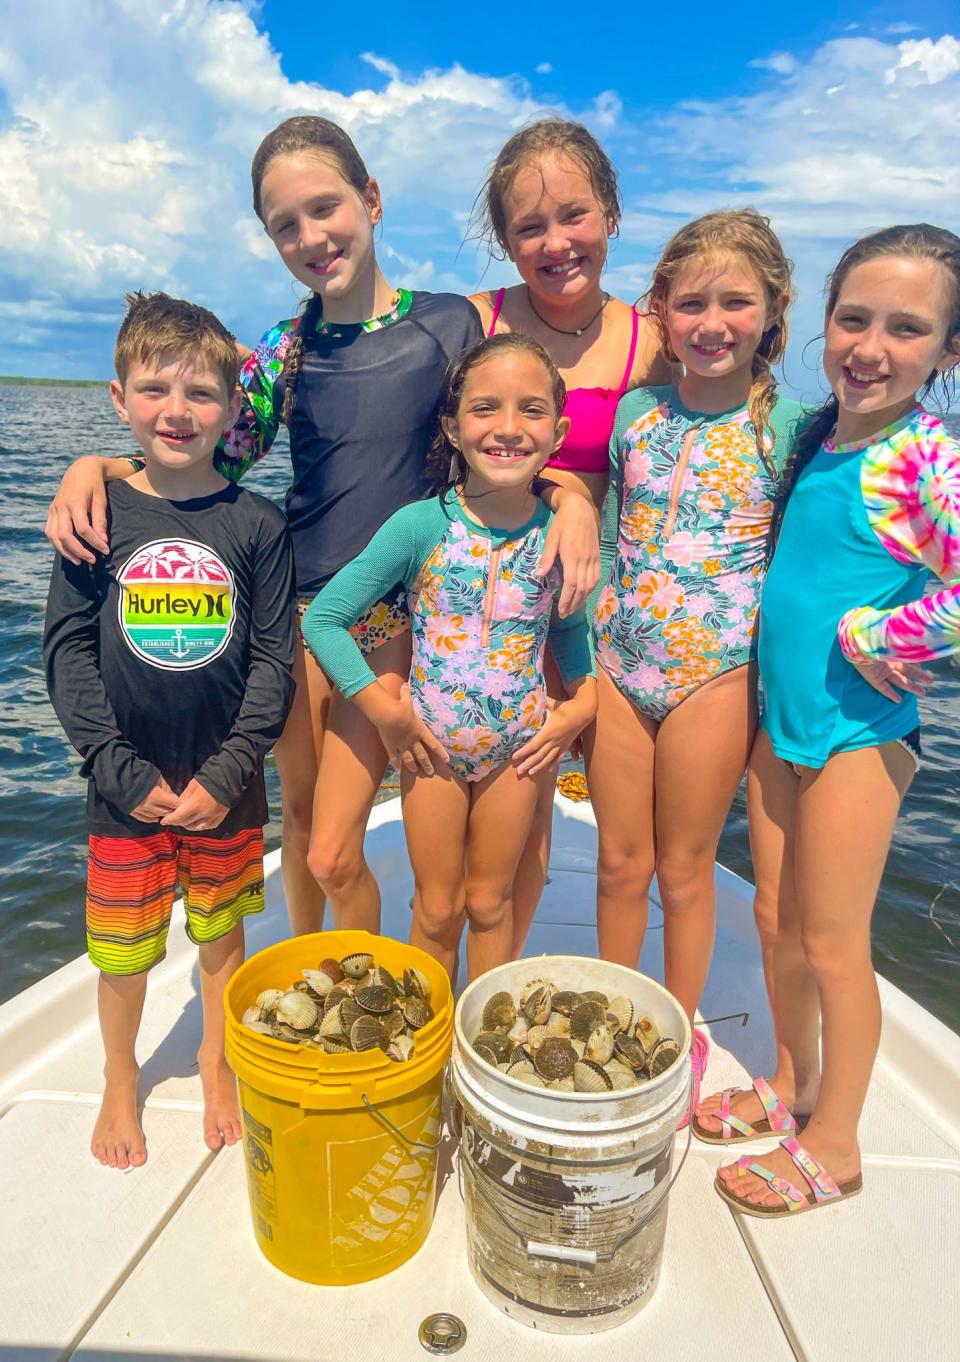 Did someone say scallops? Big Bend area hasn’t produced like years past. The “Keaton kids” had no problem filling buckets in their area. We all may need to look further East for those tasty little shellfish.